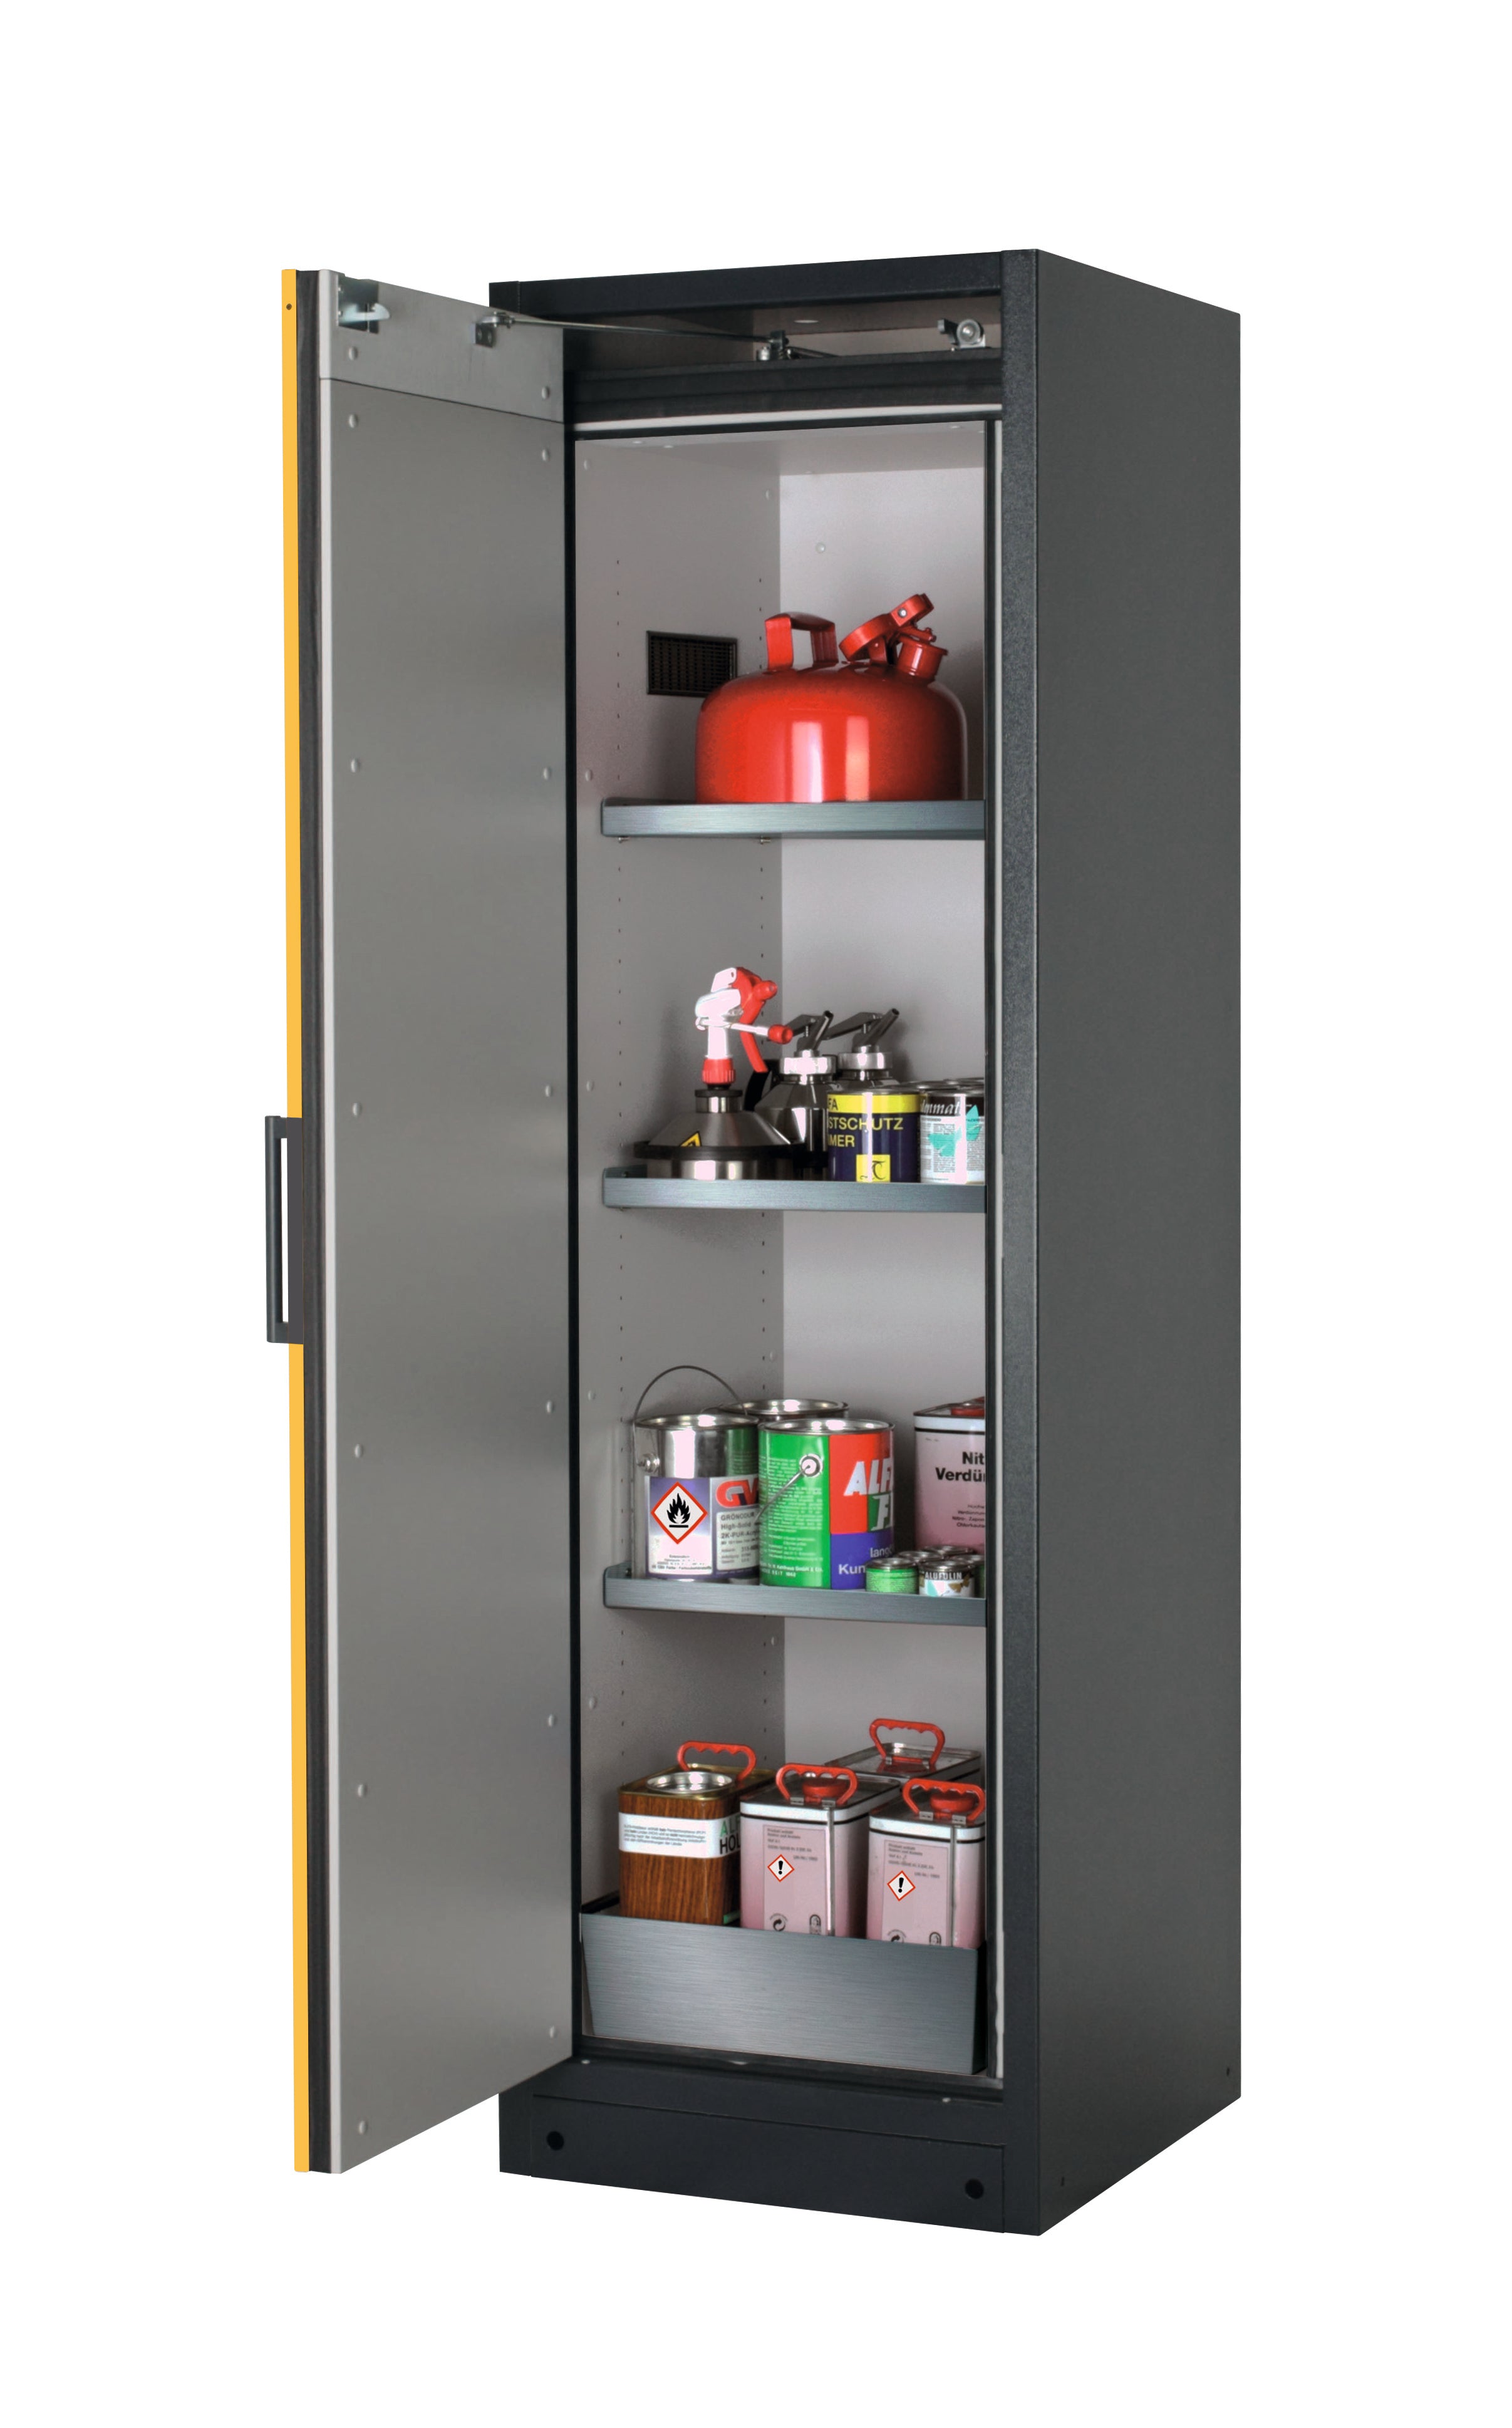 Type 90 safety storage cabinet Q-PEGASUS-90 model Q90.195.060.WDAC in warning yellow RAL 1004 with 3x shelf standard (stainless steel 1.4301),